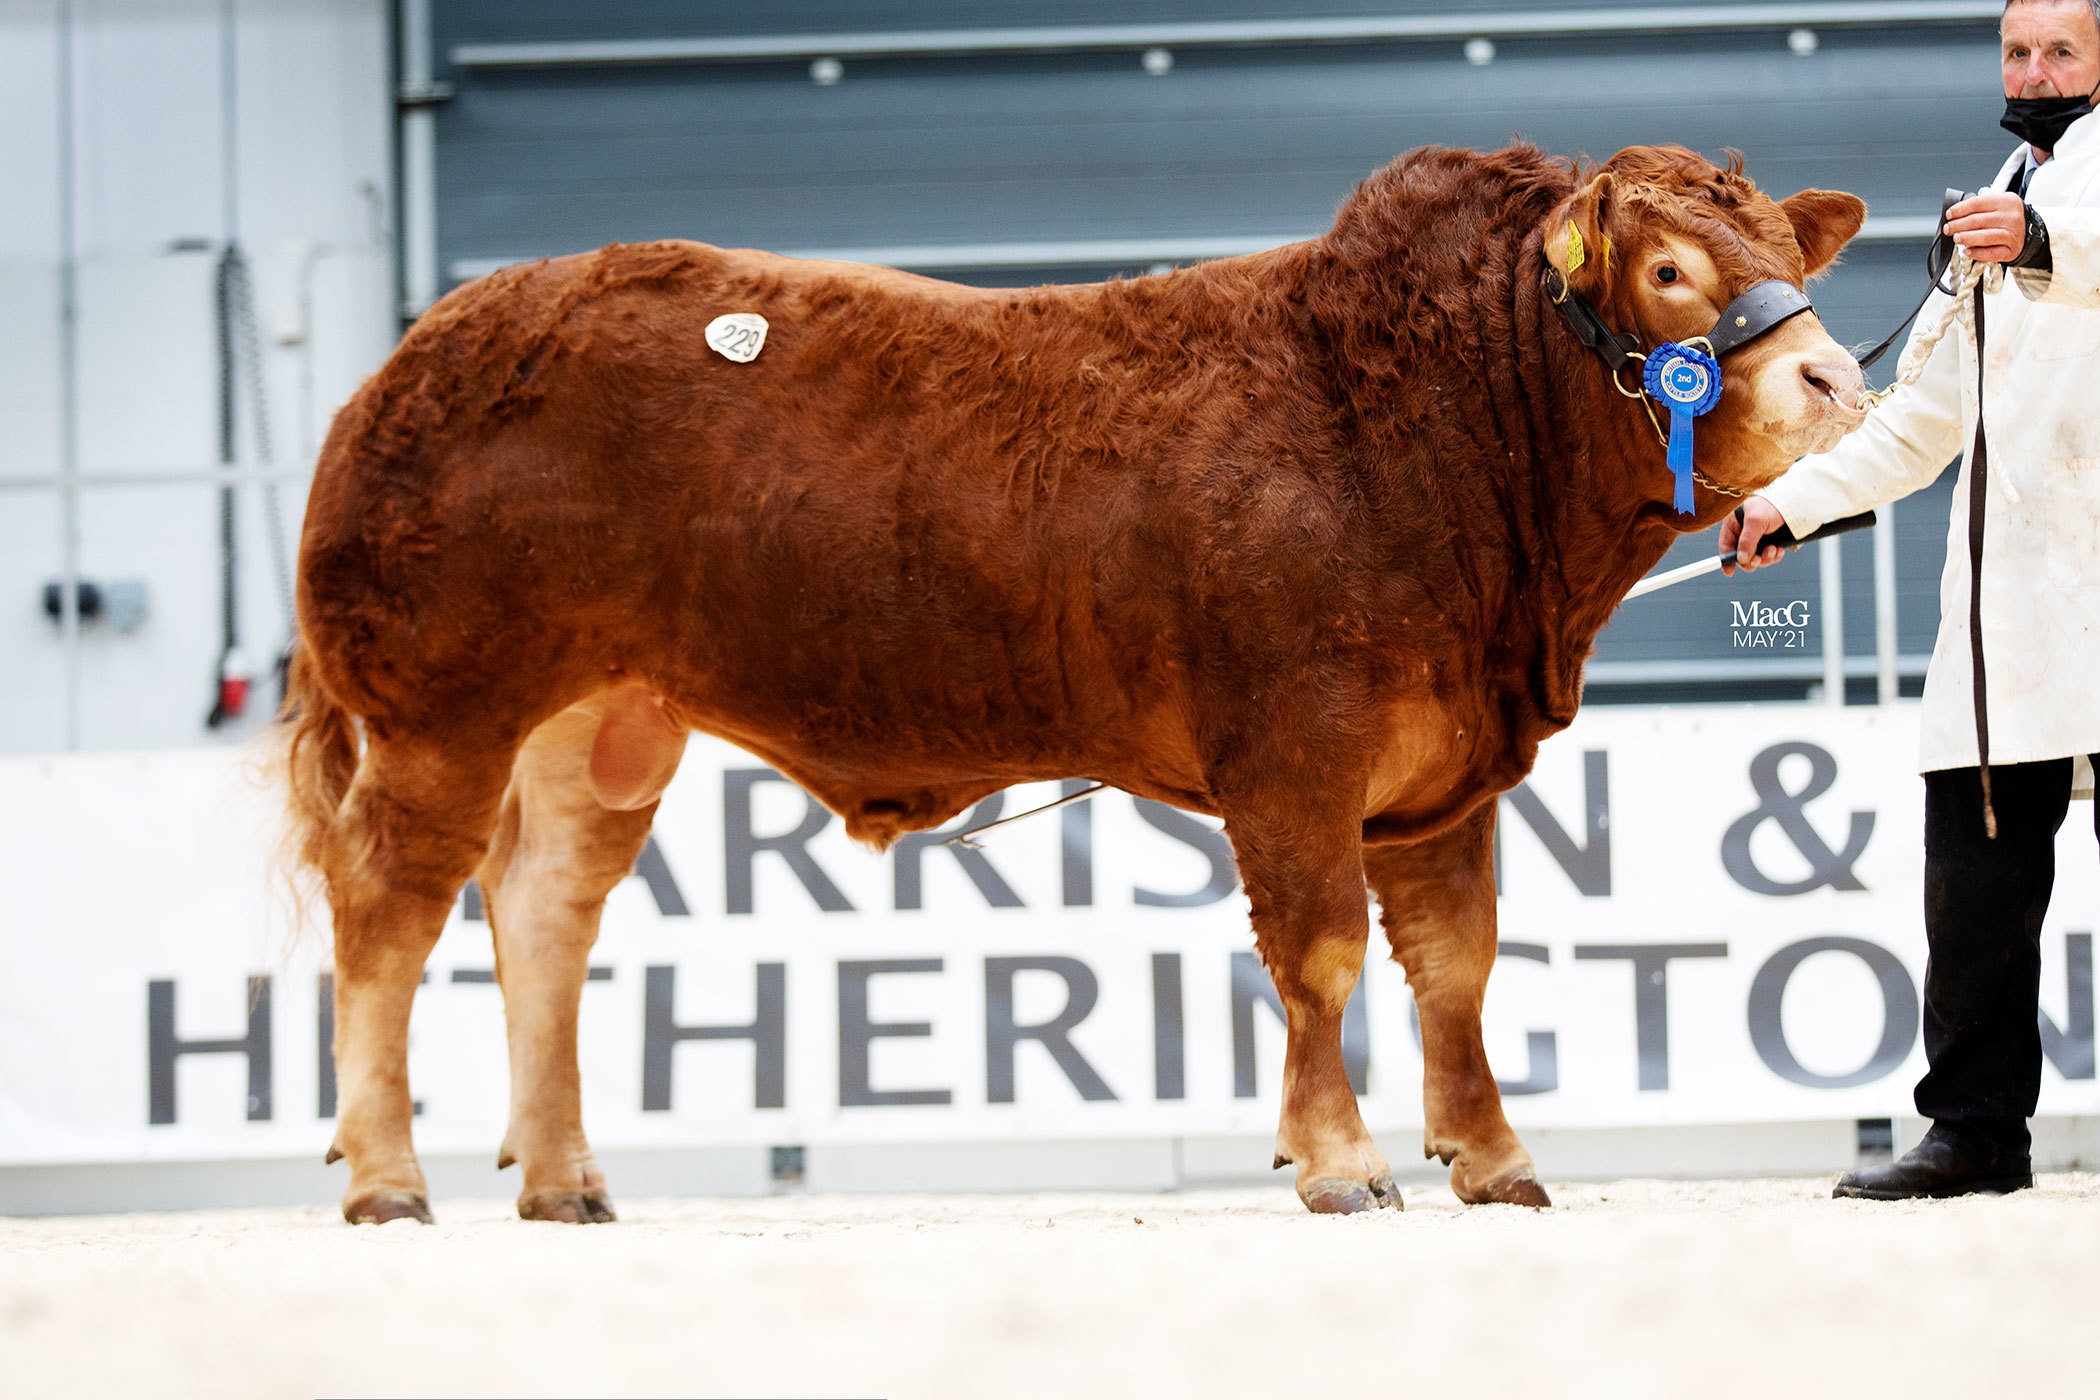 Another from Messrs Jenkinson, Whinfellpark Poldark made 18,000gns